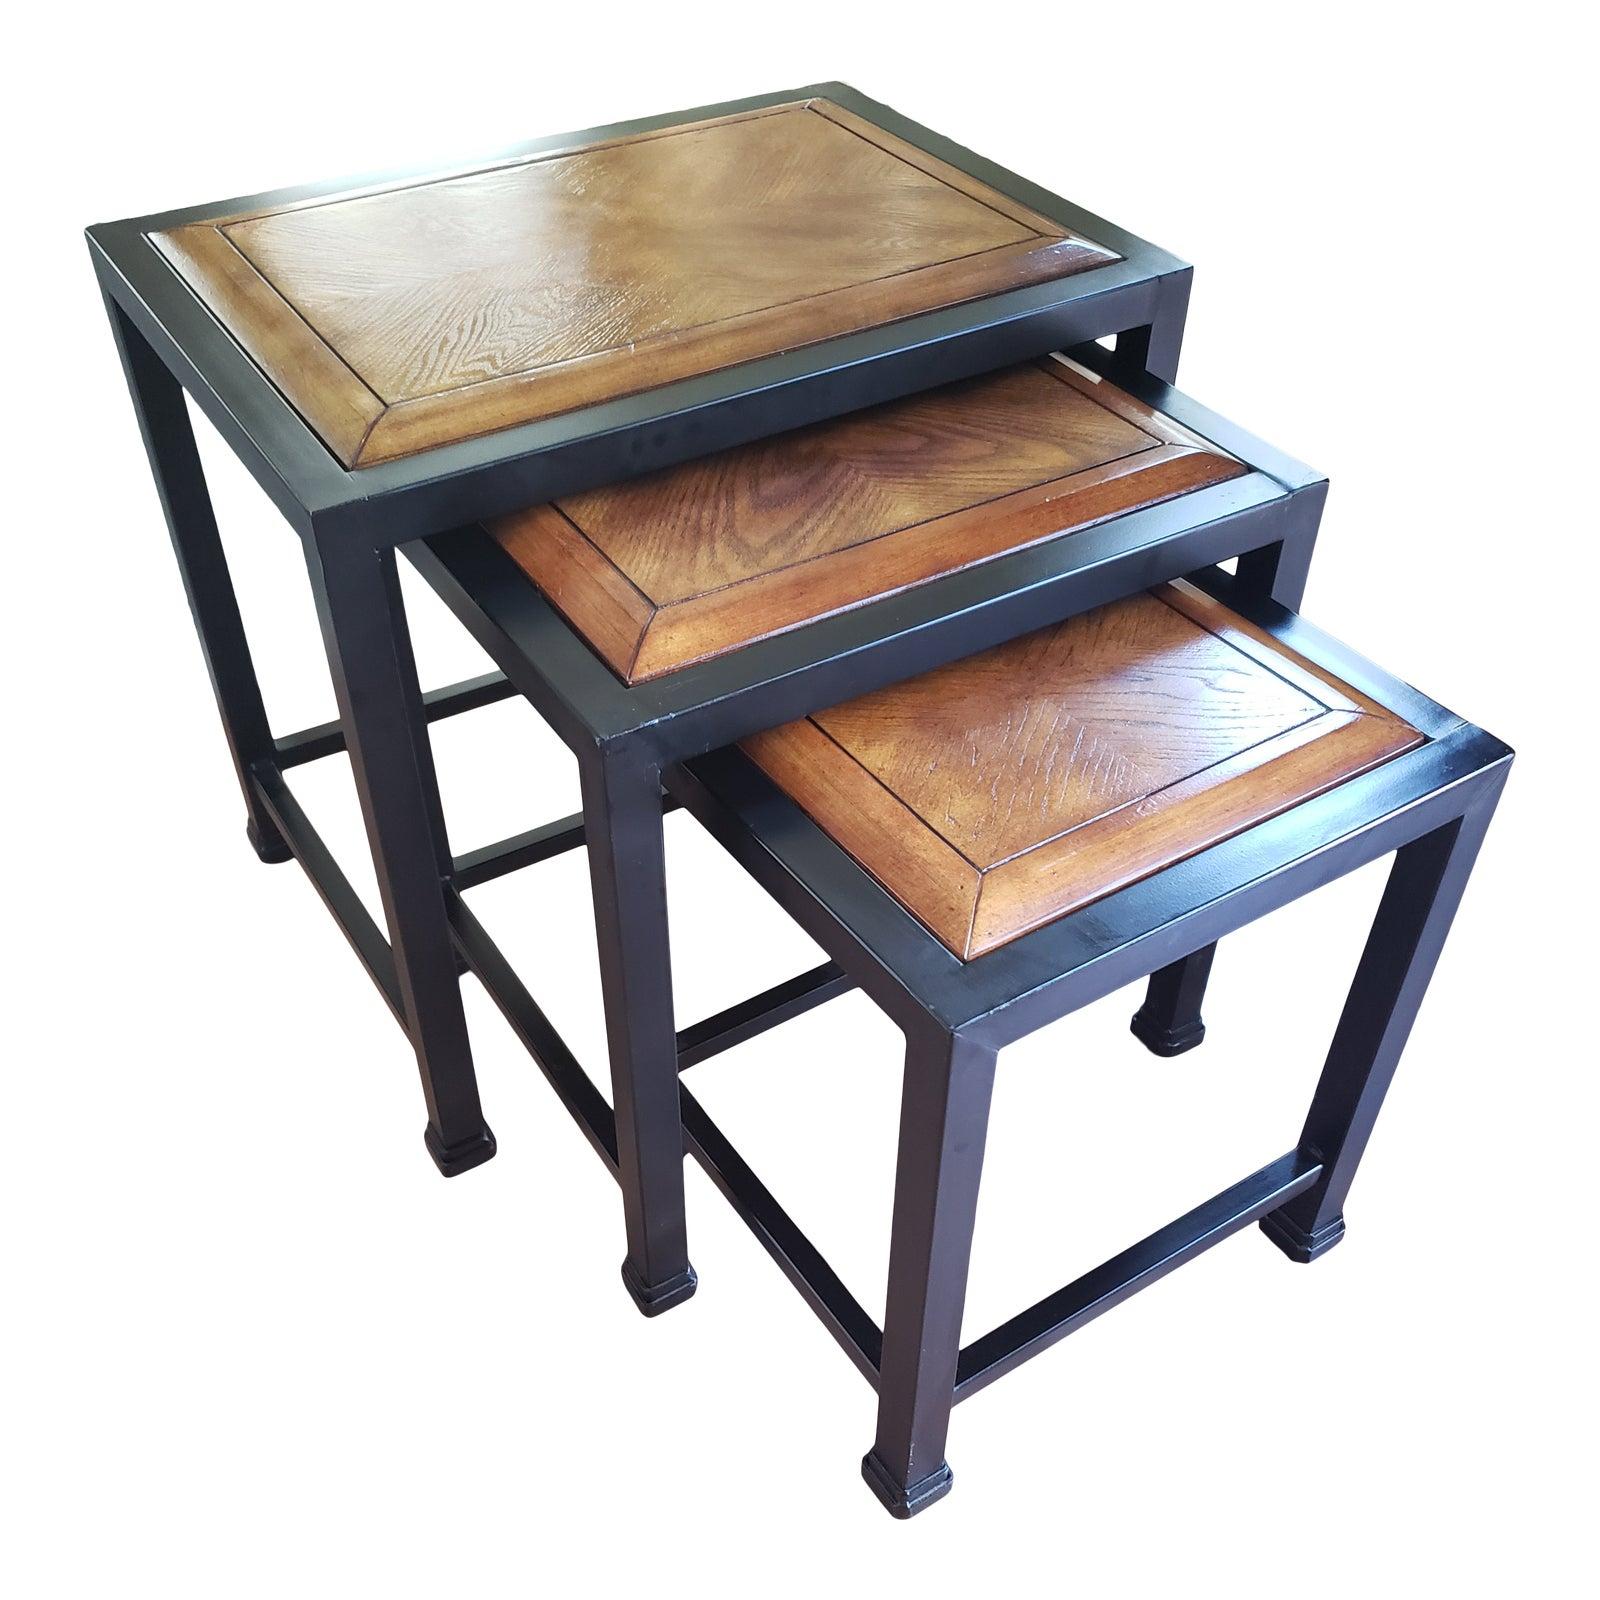 1990s Italian Metal and Wood Nesting Tables, Set of 3 For Sale